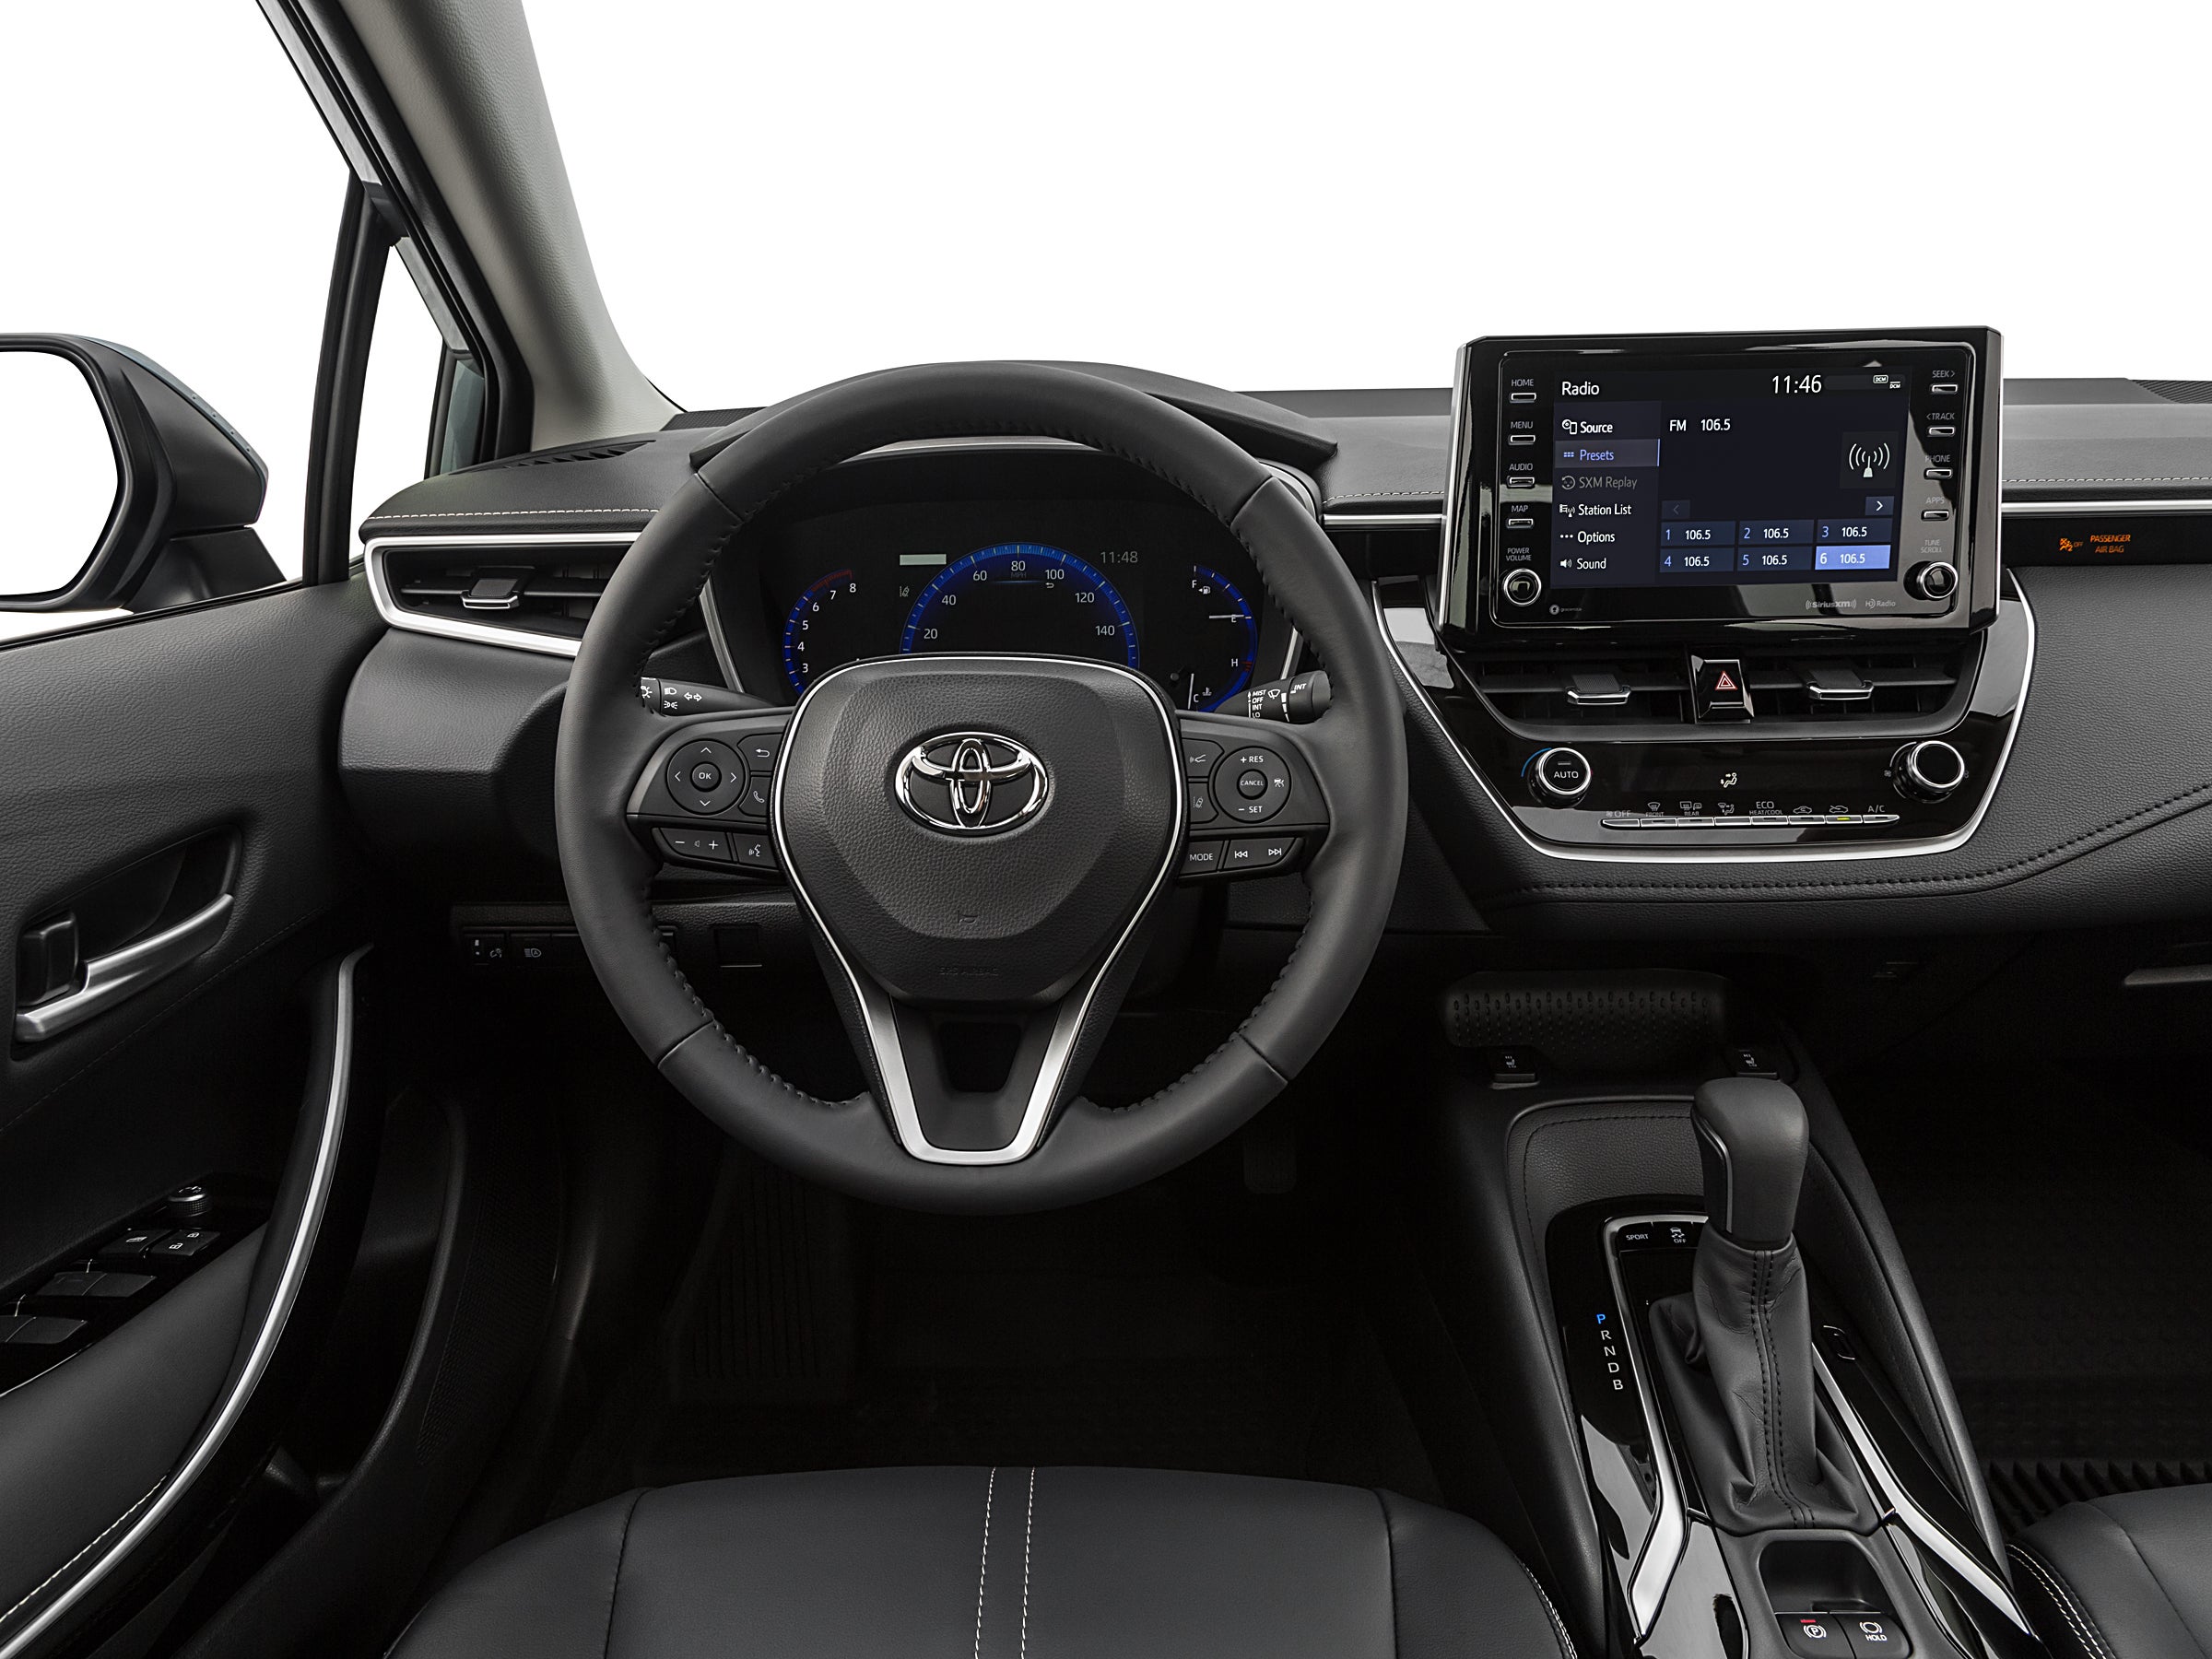 Toyota Corolla Cross, Remote Keyless Entry, Toyota Safety Sense, Automatic Climate Control, Standard Features